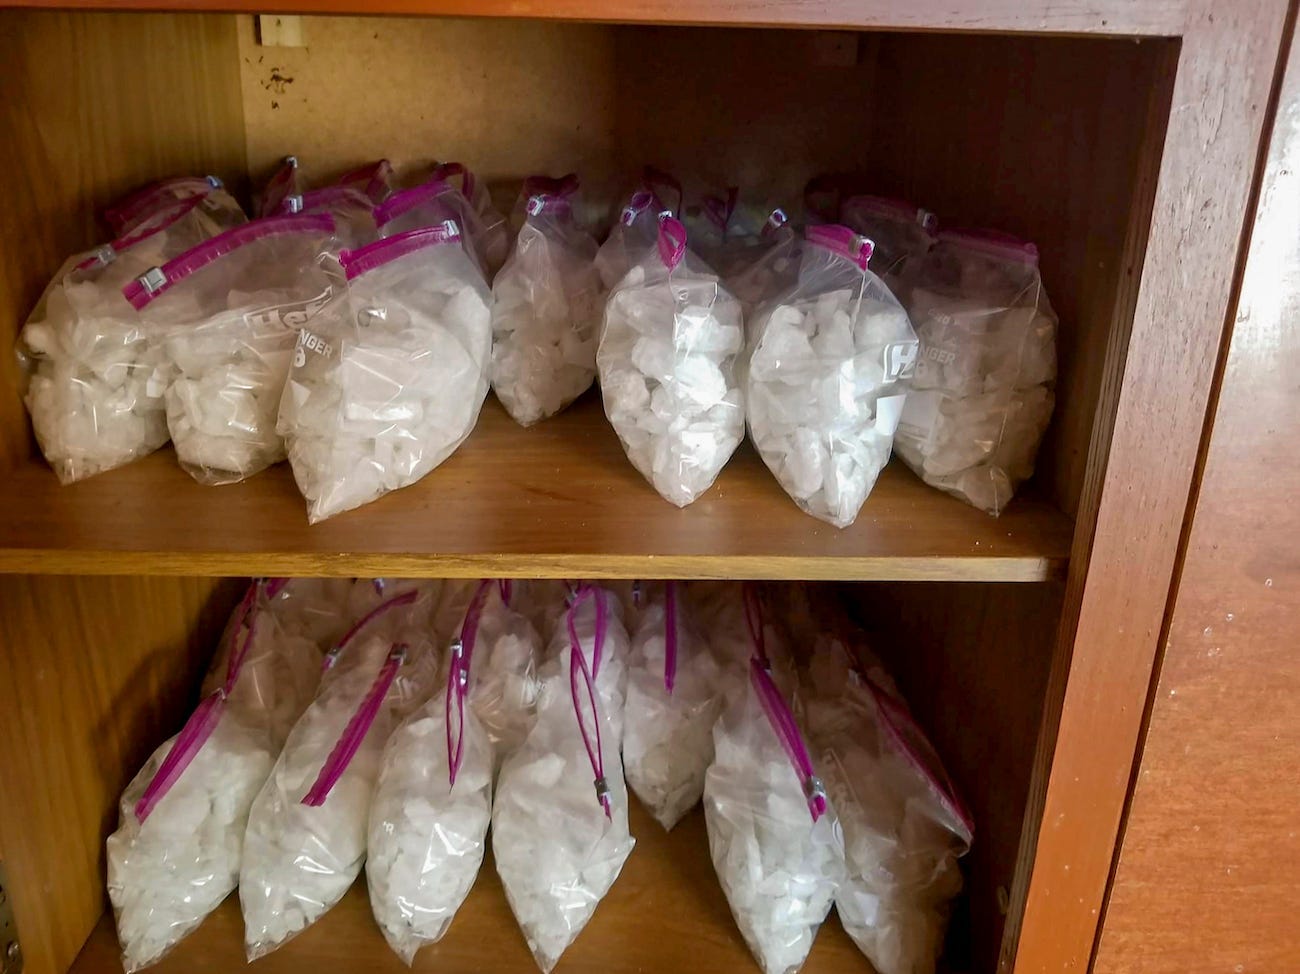 This Jan. 23, 2020, file photo released by the Tulare County Sheriff's Office shows evidence seized after a Jan. 5 traffic stop led officers to major methamphetamine and fentanyl trafficking operation, including labs inside three homes in Pixley, Calif., and drugs with a street value of $1.5 million, authorities said. A record 621 people died of drug overdoses in San Francisco so far in 2020, a staggering number that far outpaces the 173 deaths from COVID-19 the city has seen thus far.